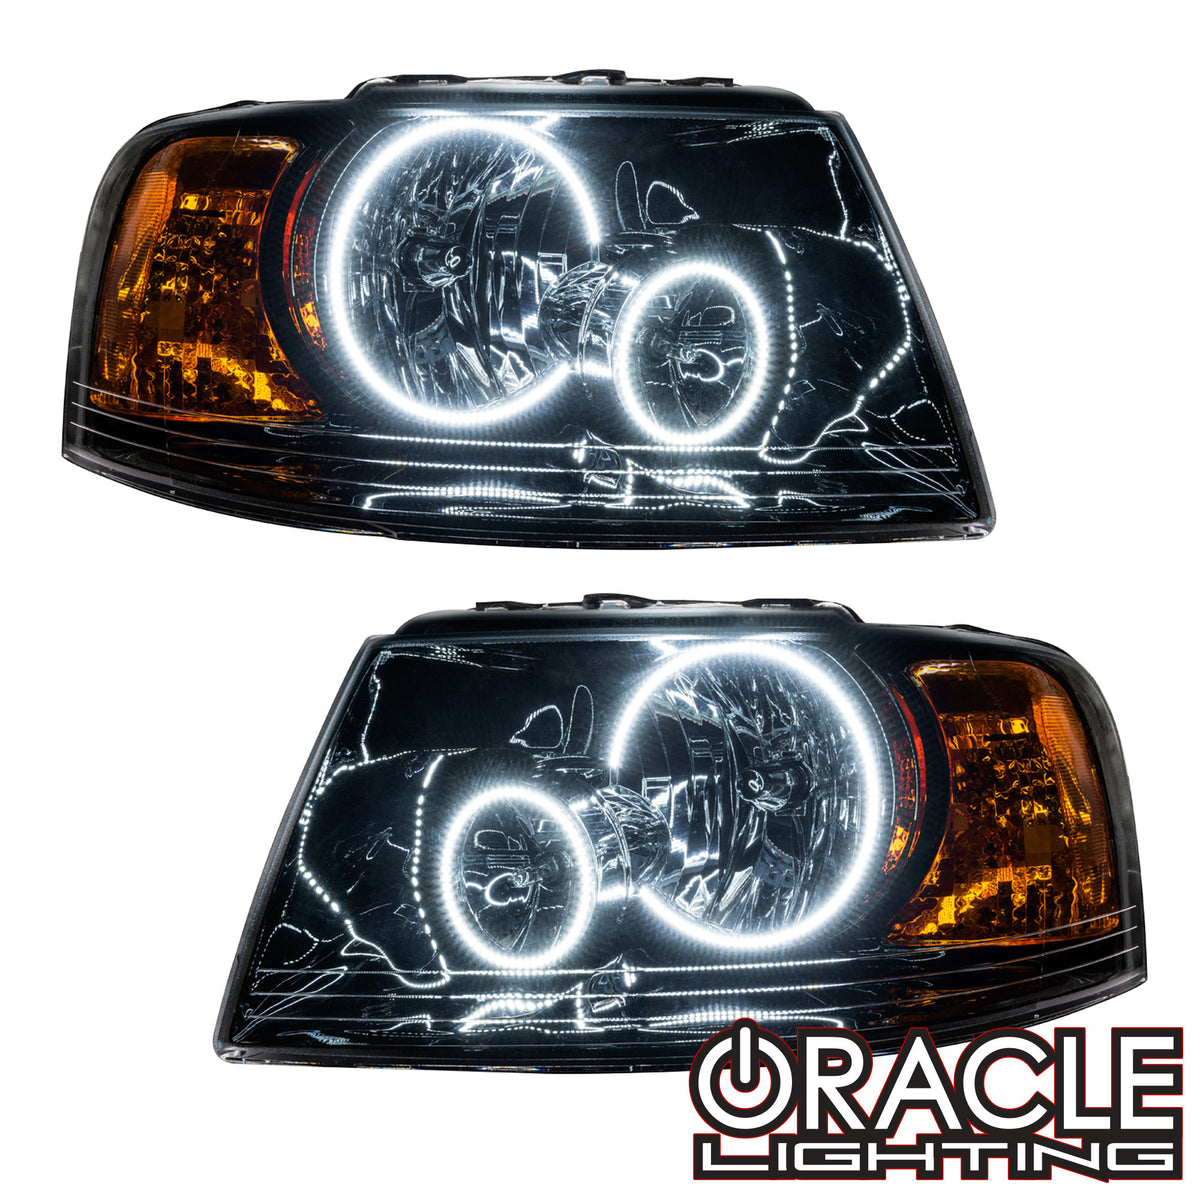 2003-2006 Ford Expedition Pre-Assembled Halo Headlights - Black